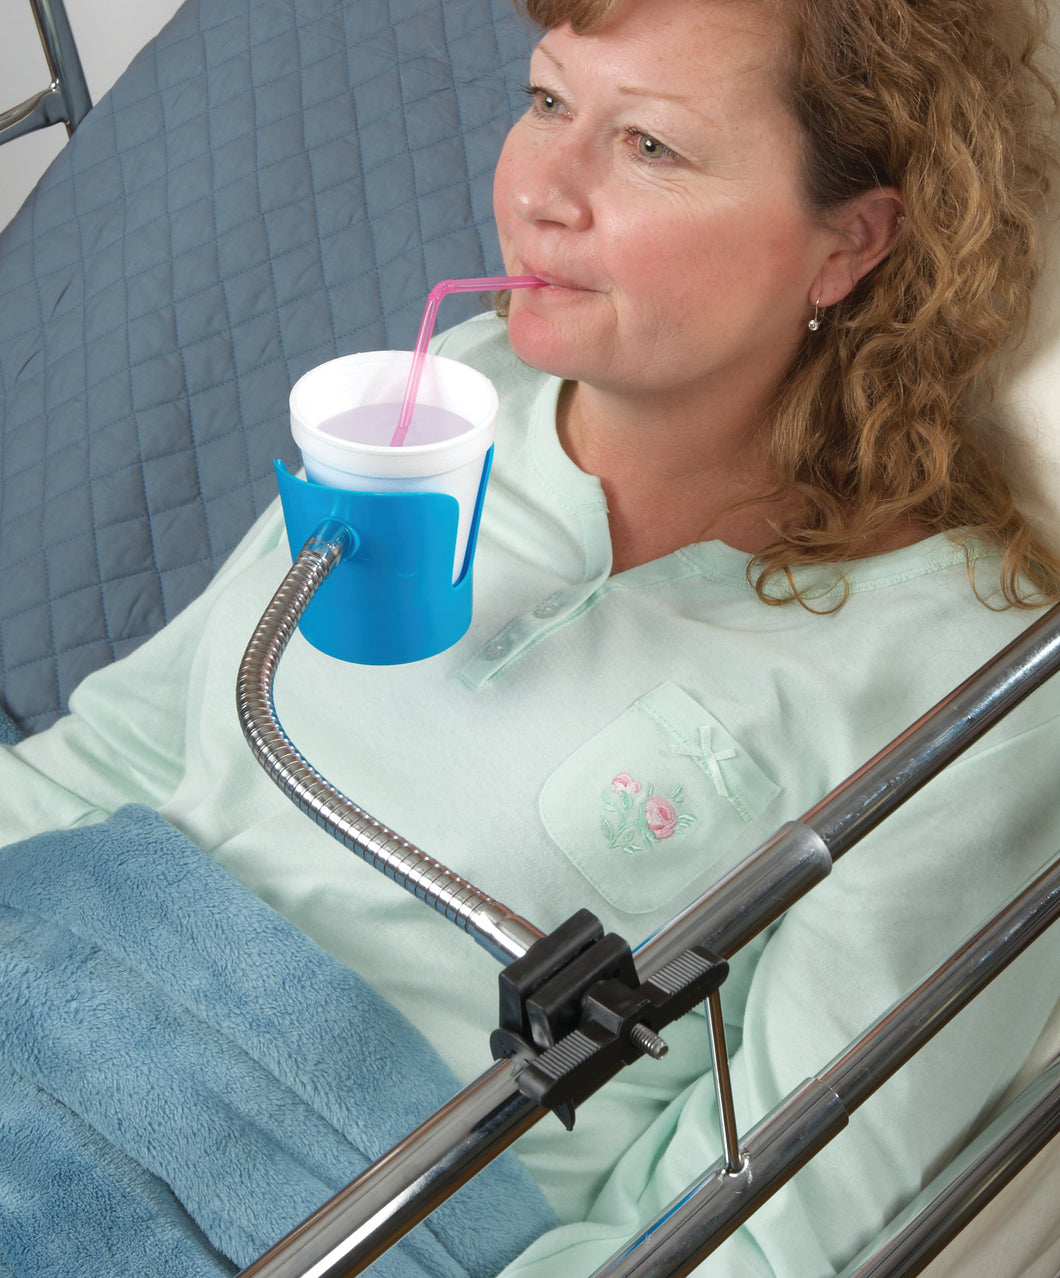 Bedside Beverage Holder being used by a patient